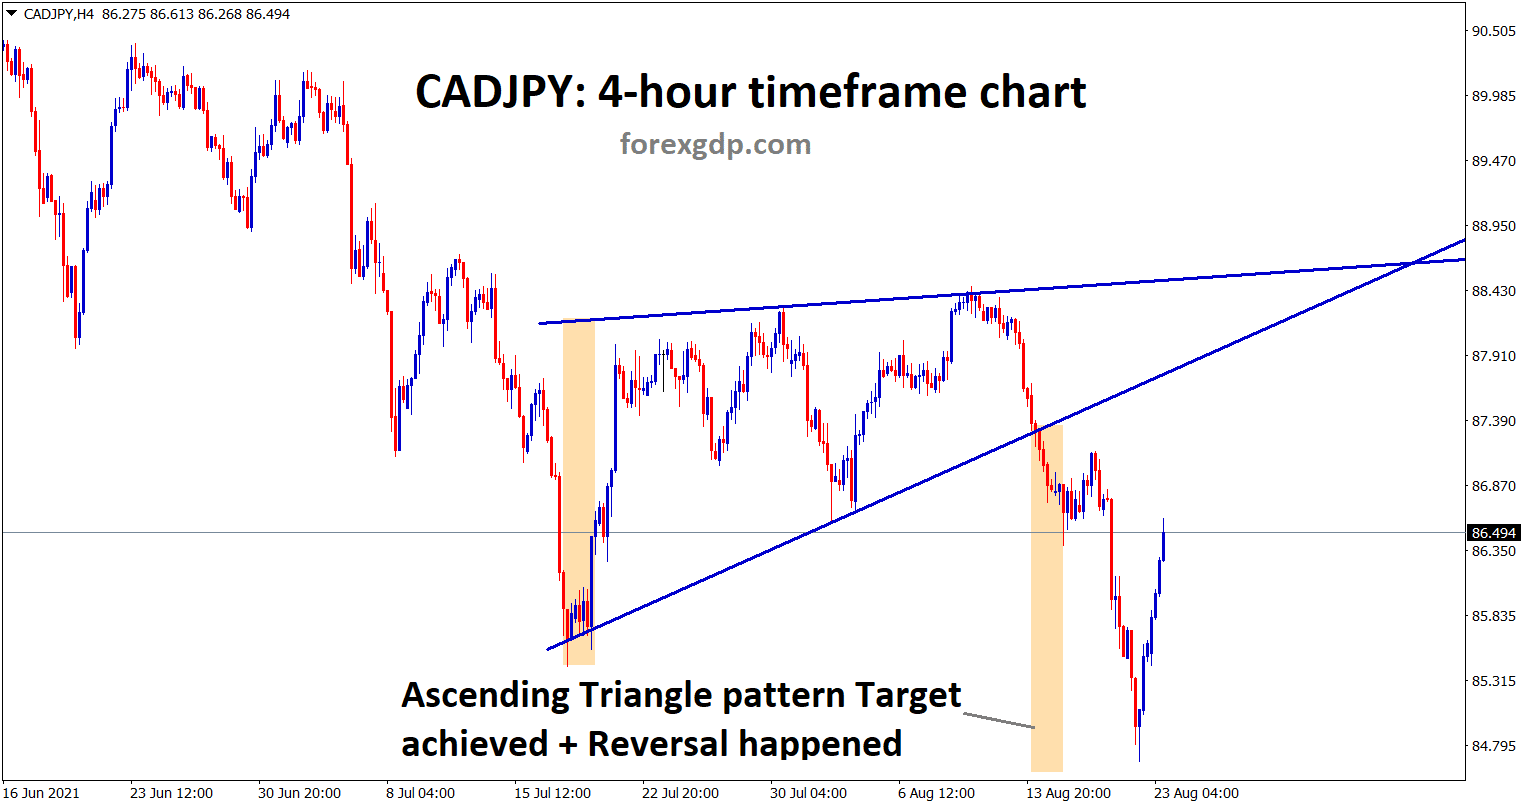 CADJPY achieved its Ascending Triangle Pattern target and starts to reverse